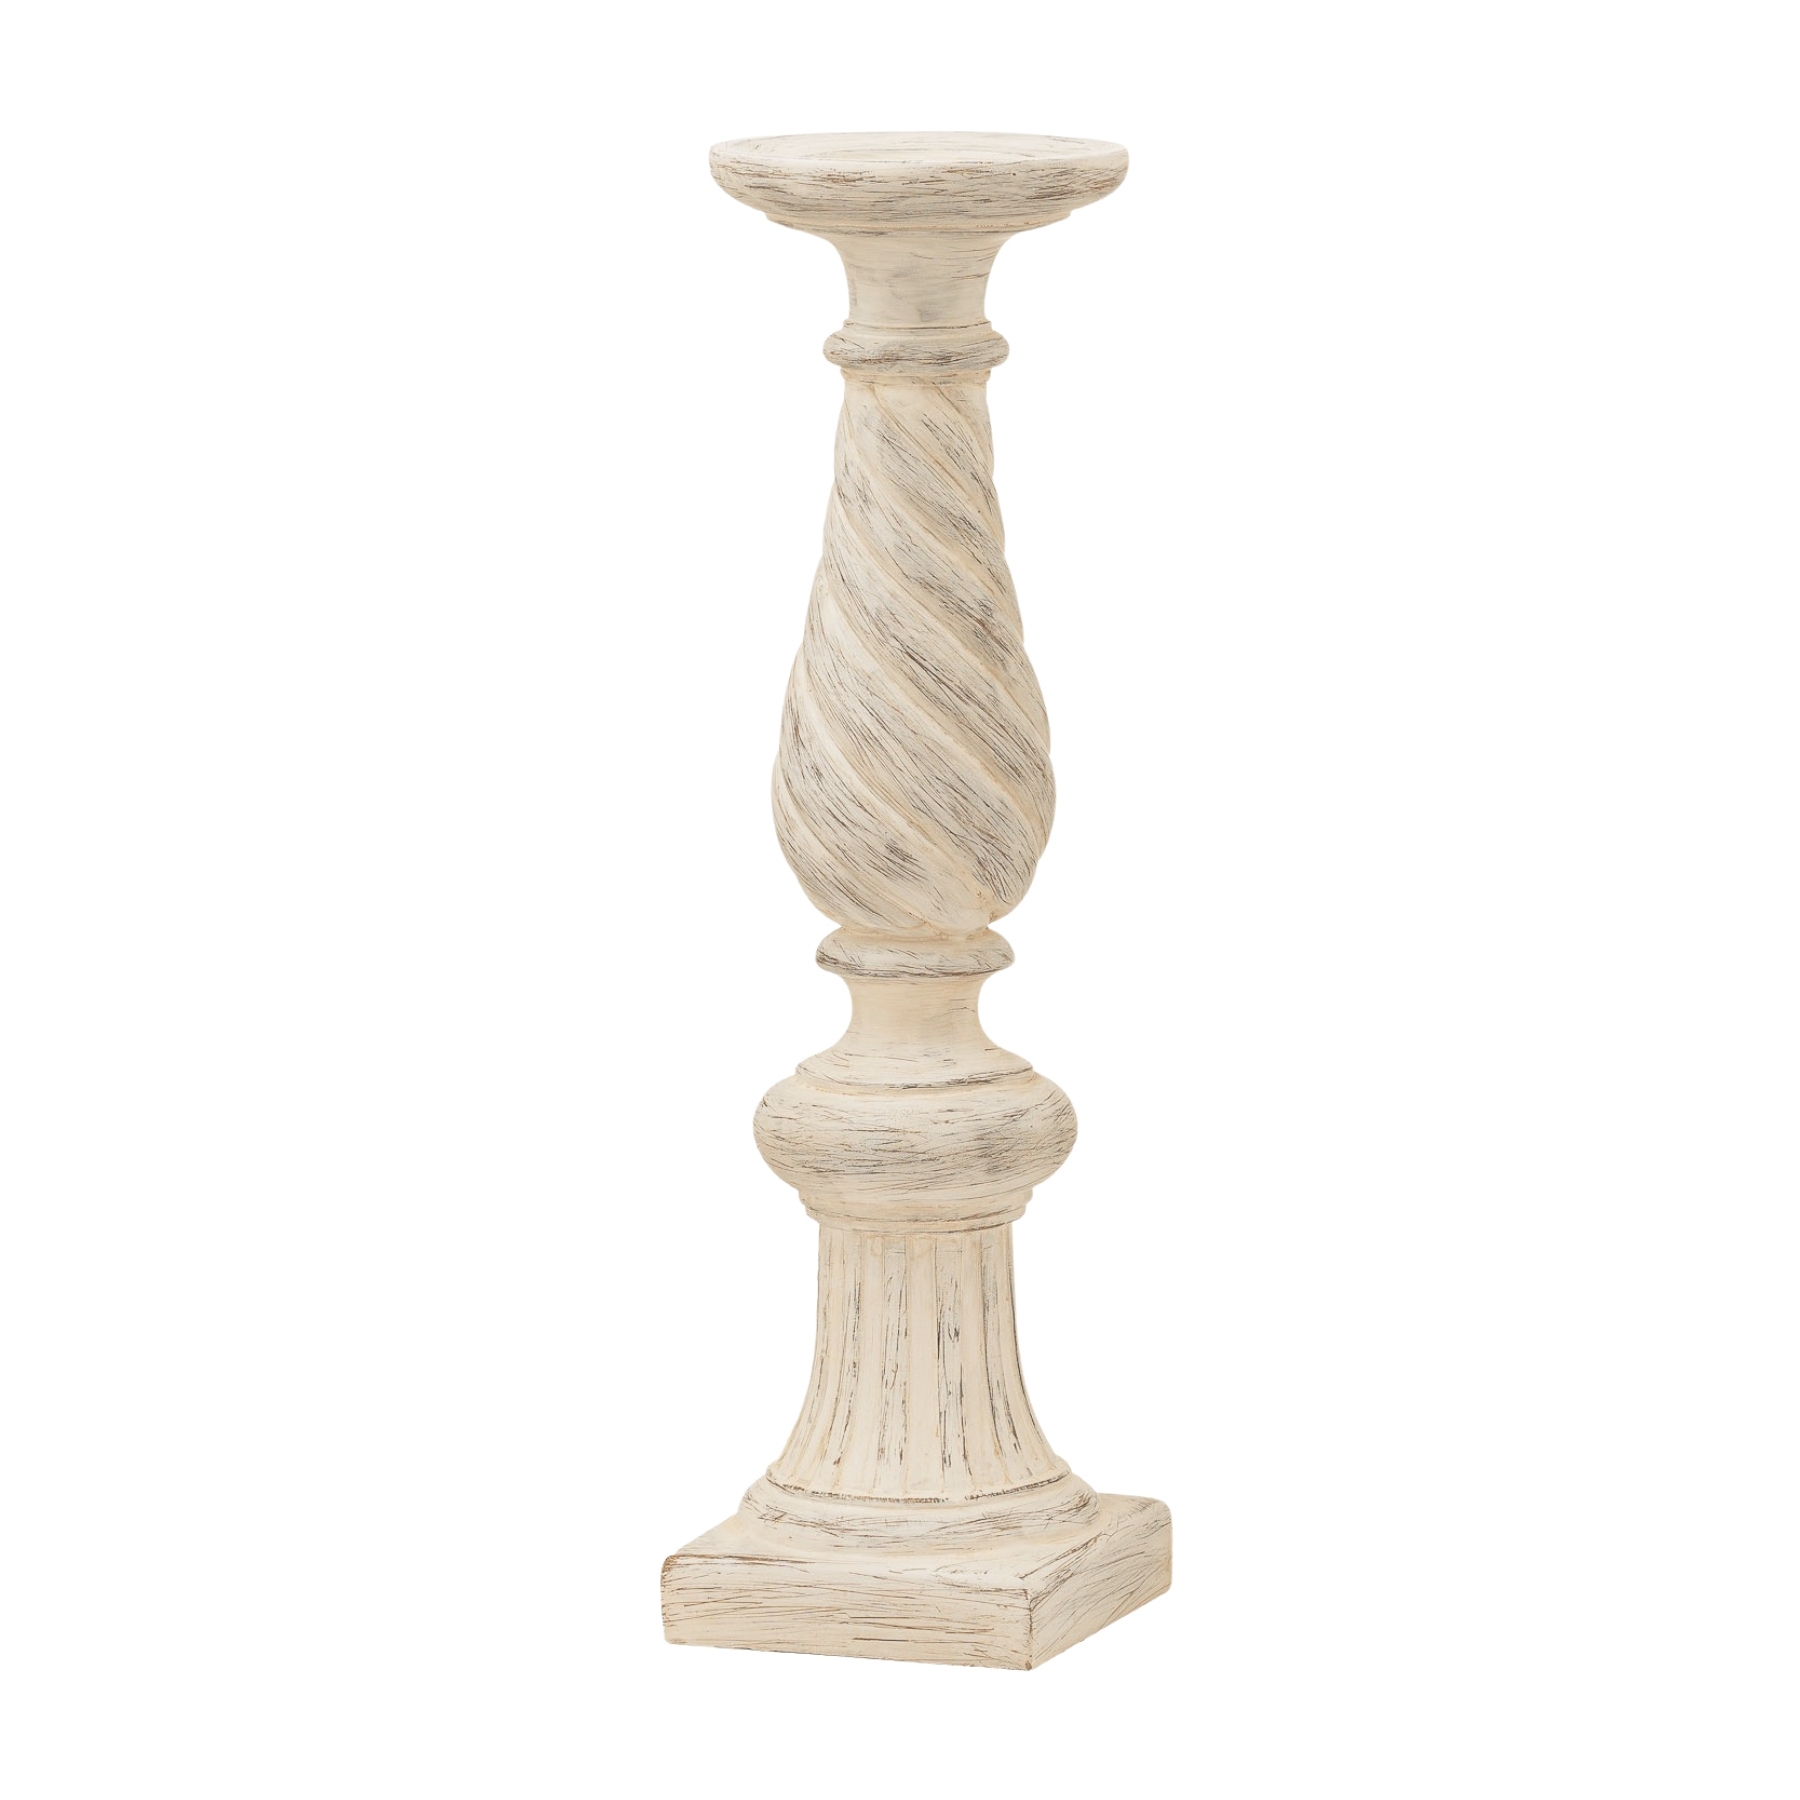 Antique Ivory Twisted Candle Column - Image 1